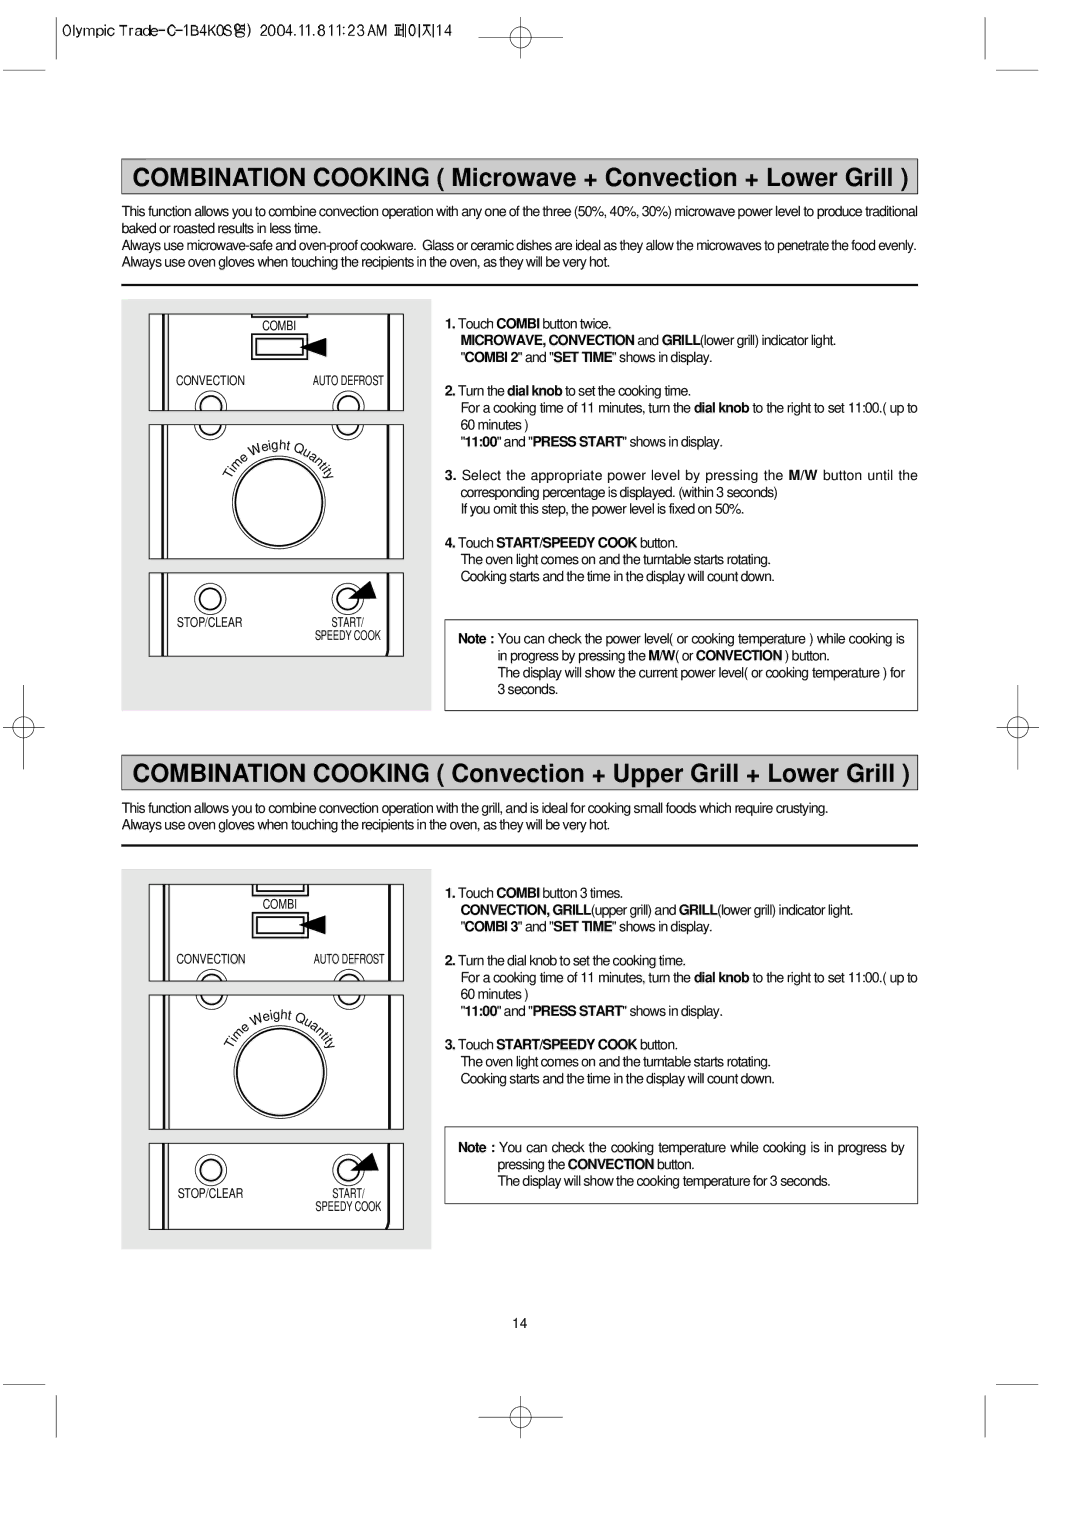 Daewoo KOC-1B4K owner manual Combination Cooking Microwave + Convection + Lower Grill, Touch Combi button twice 